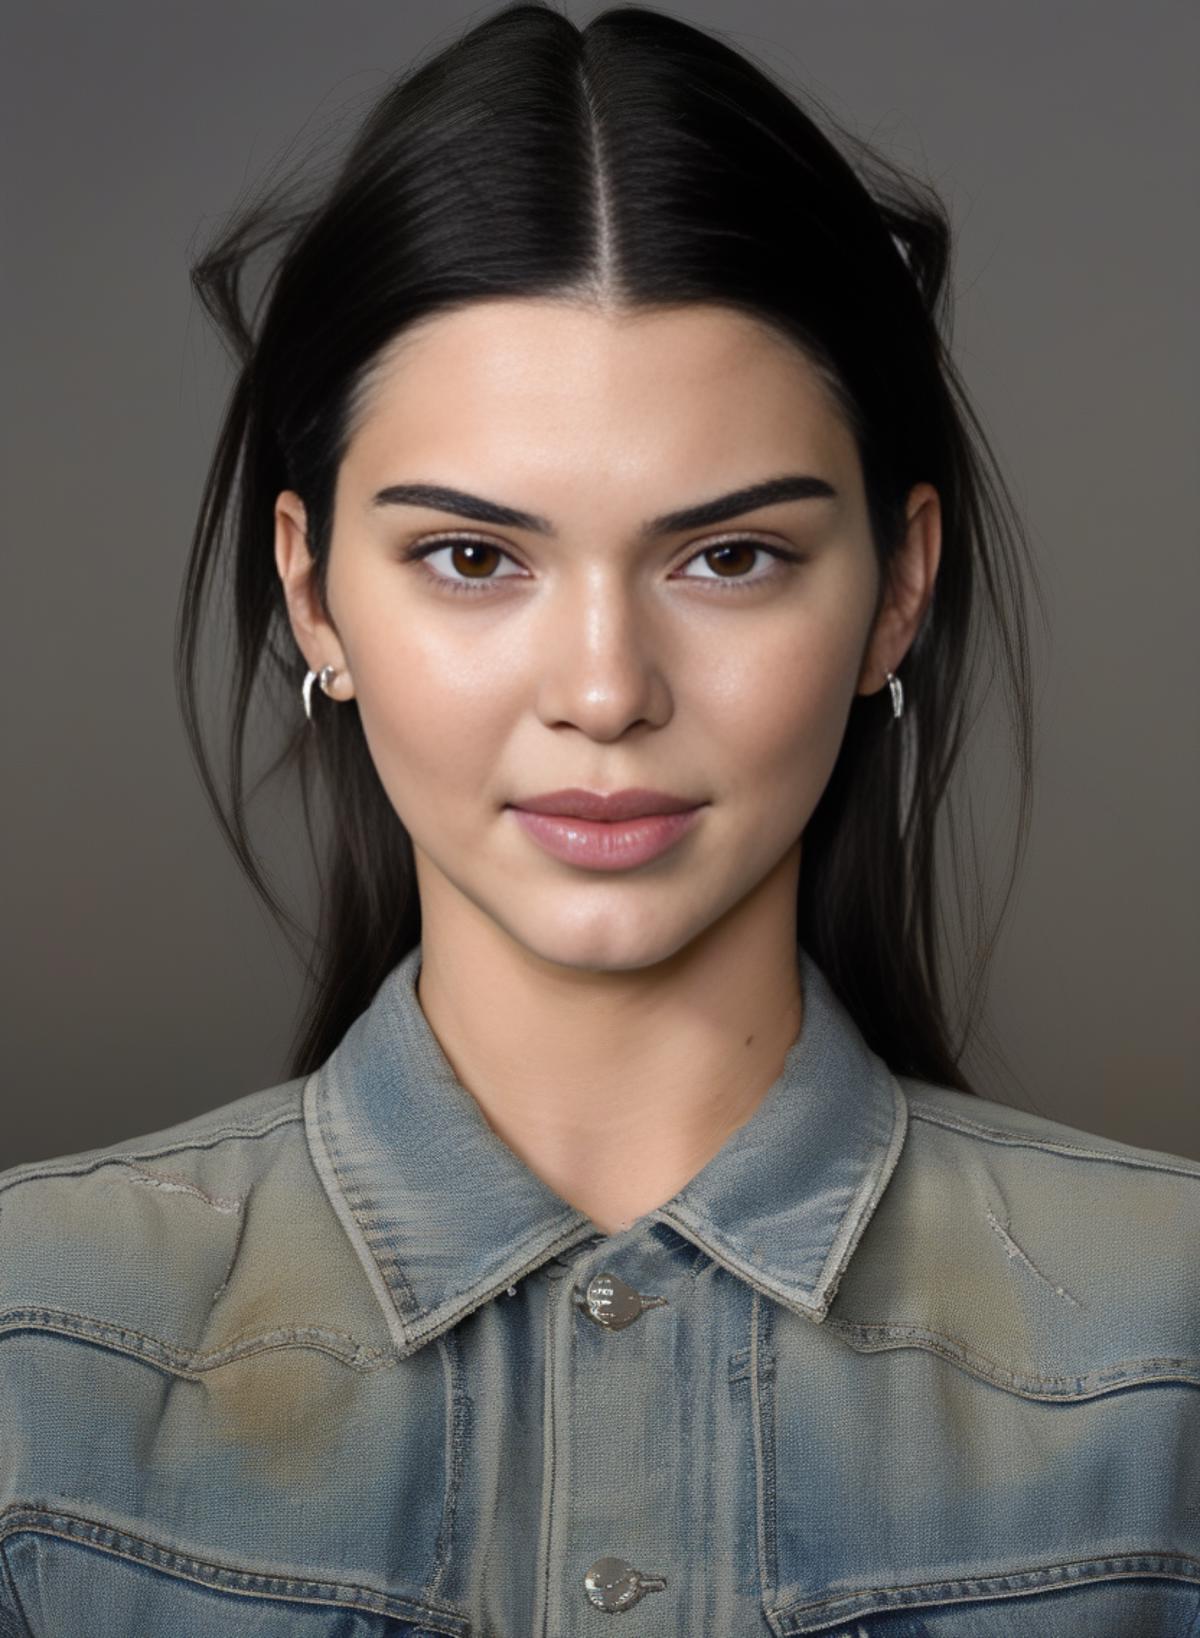 Kendall Jenner image by parar20